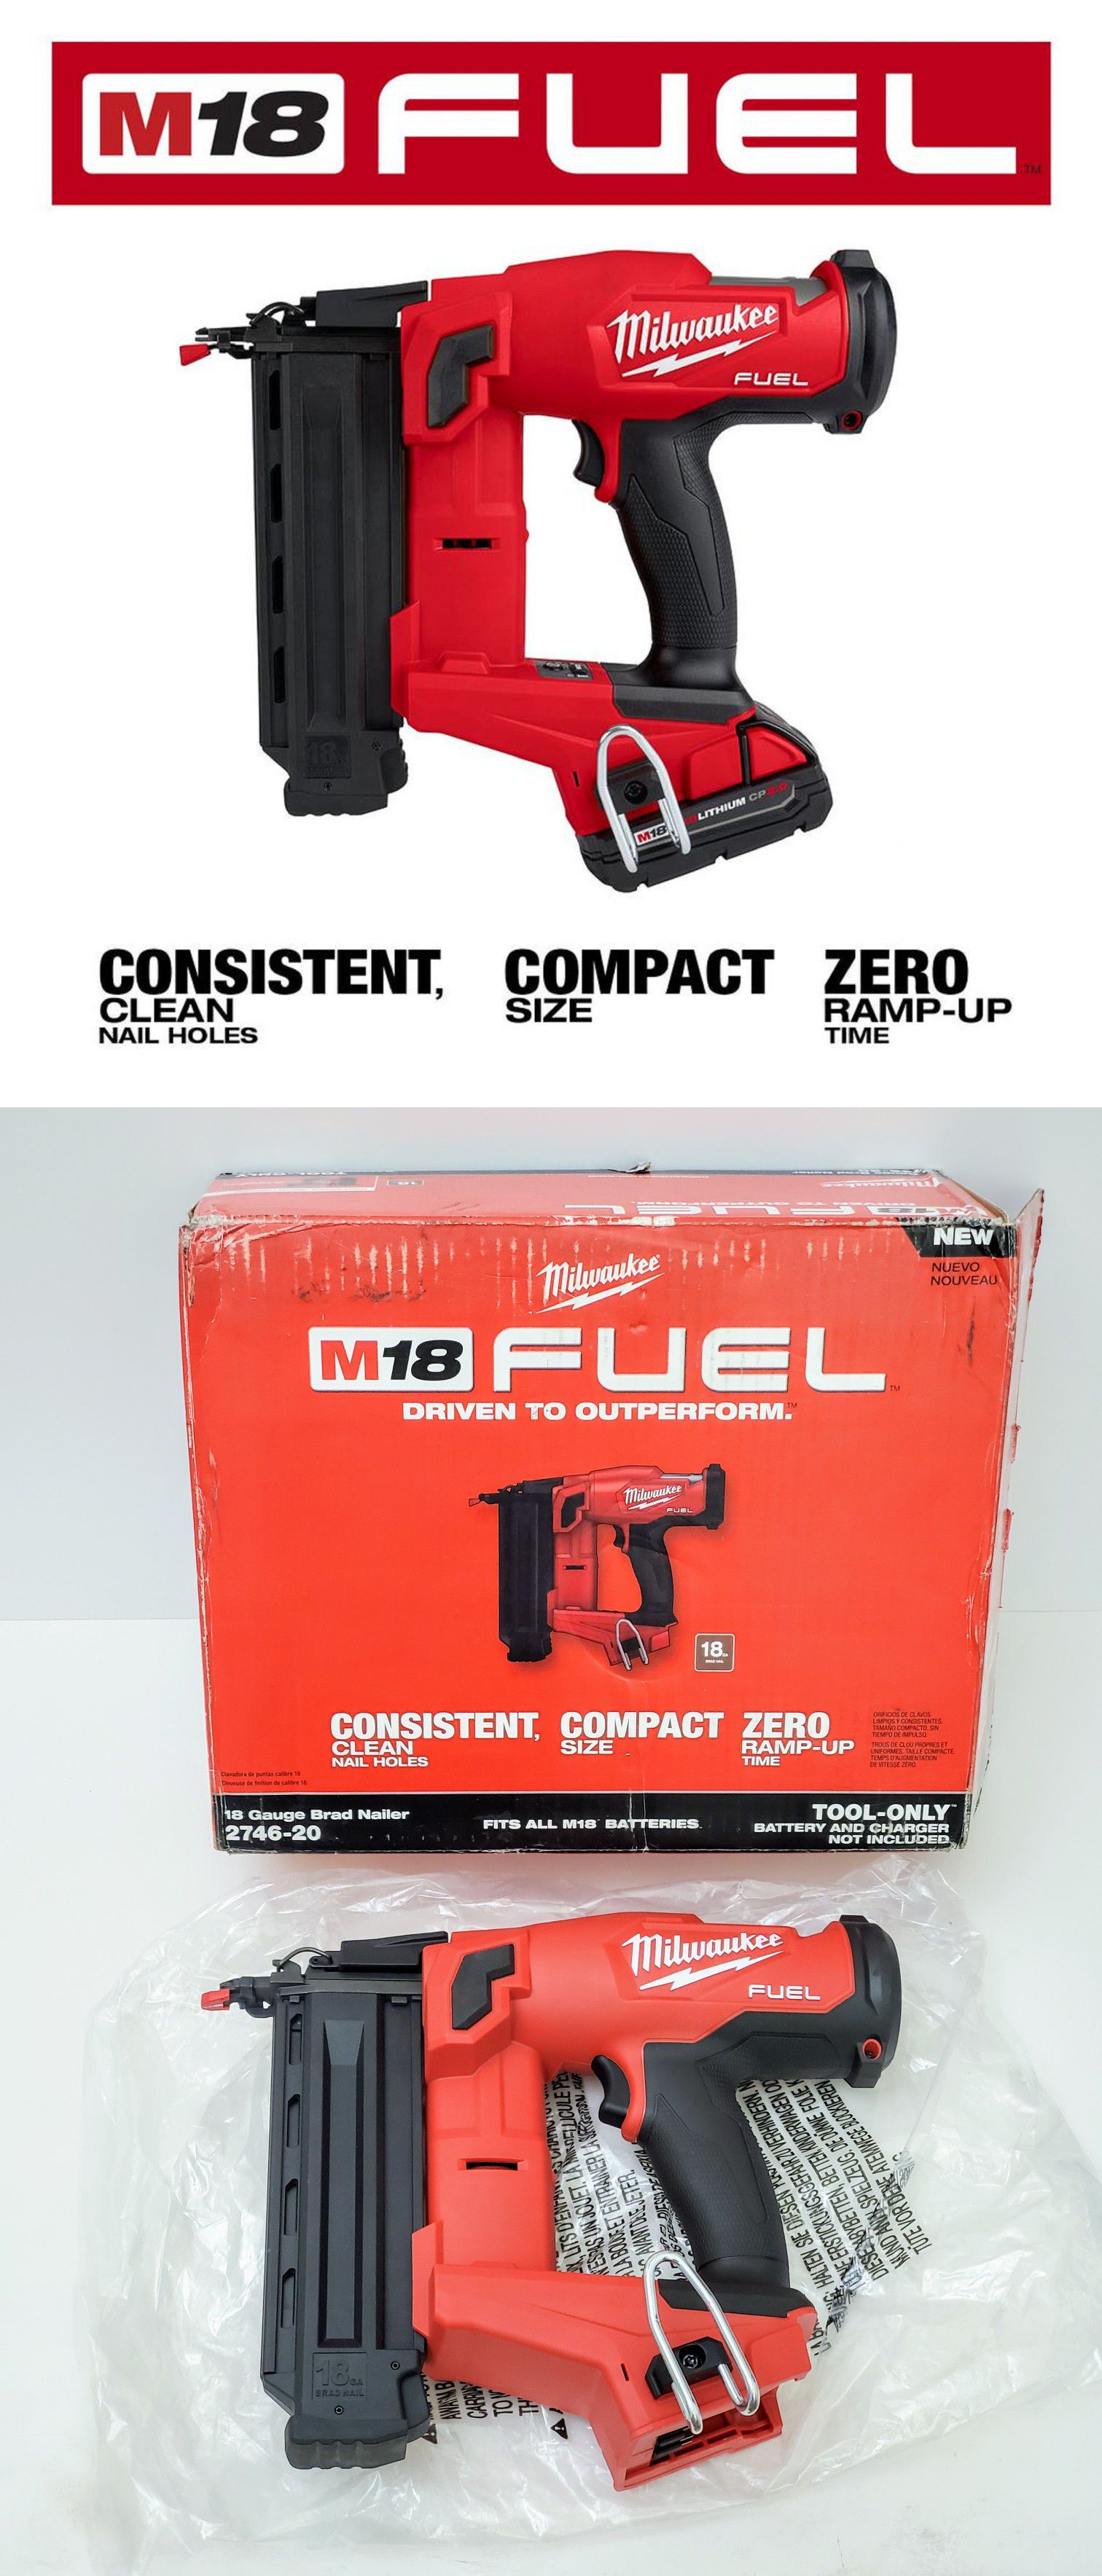 Milwaukee Gen II M18 FUEL 18 Gauge Brad Nailer Nail Gun Compact Brushless  Cordless (Tool-Only) 2746-20 for Sale in Pasadena, CA OfferUp